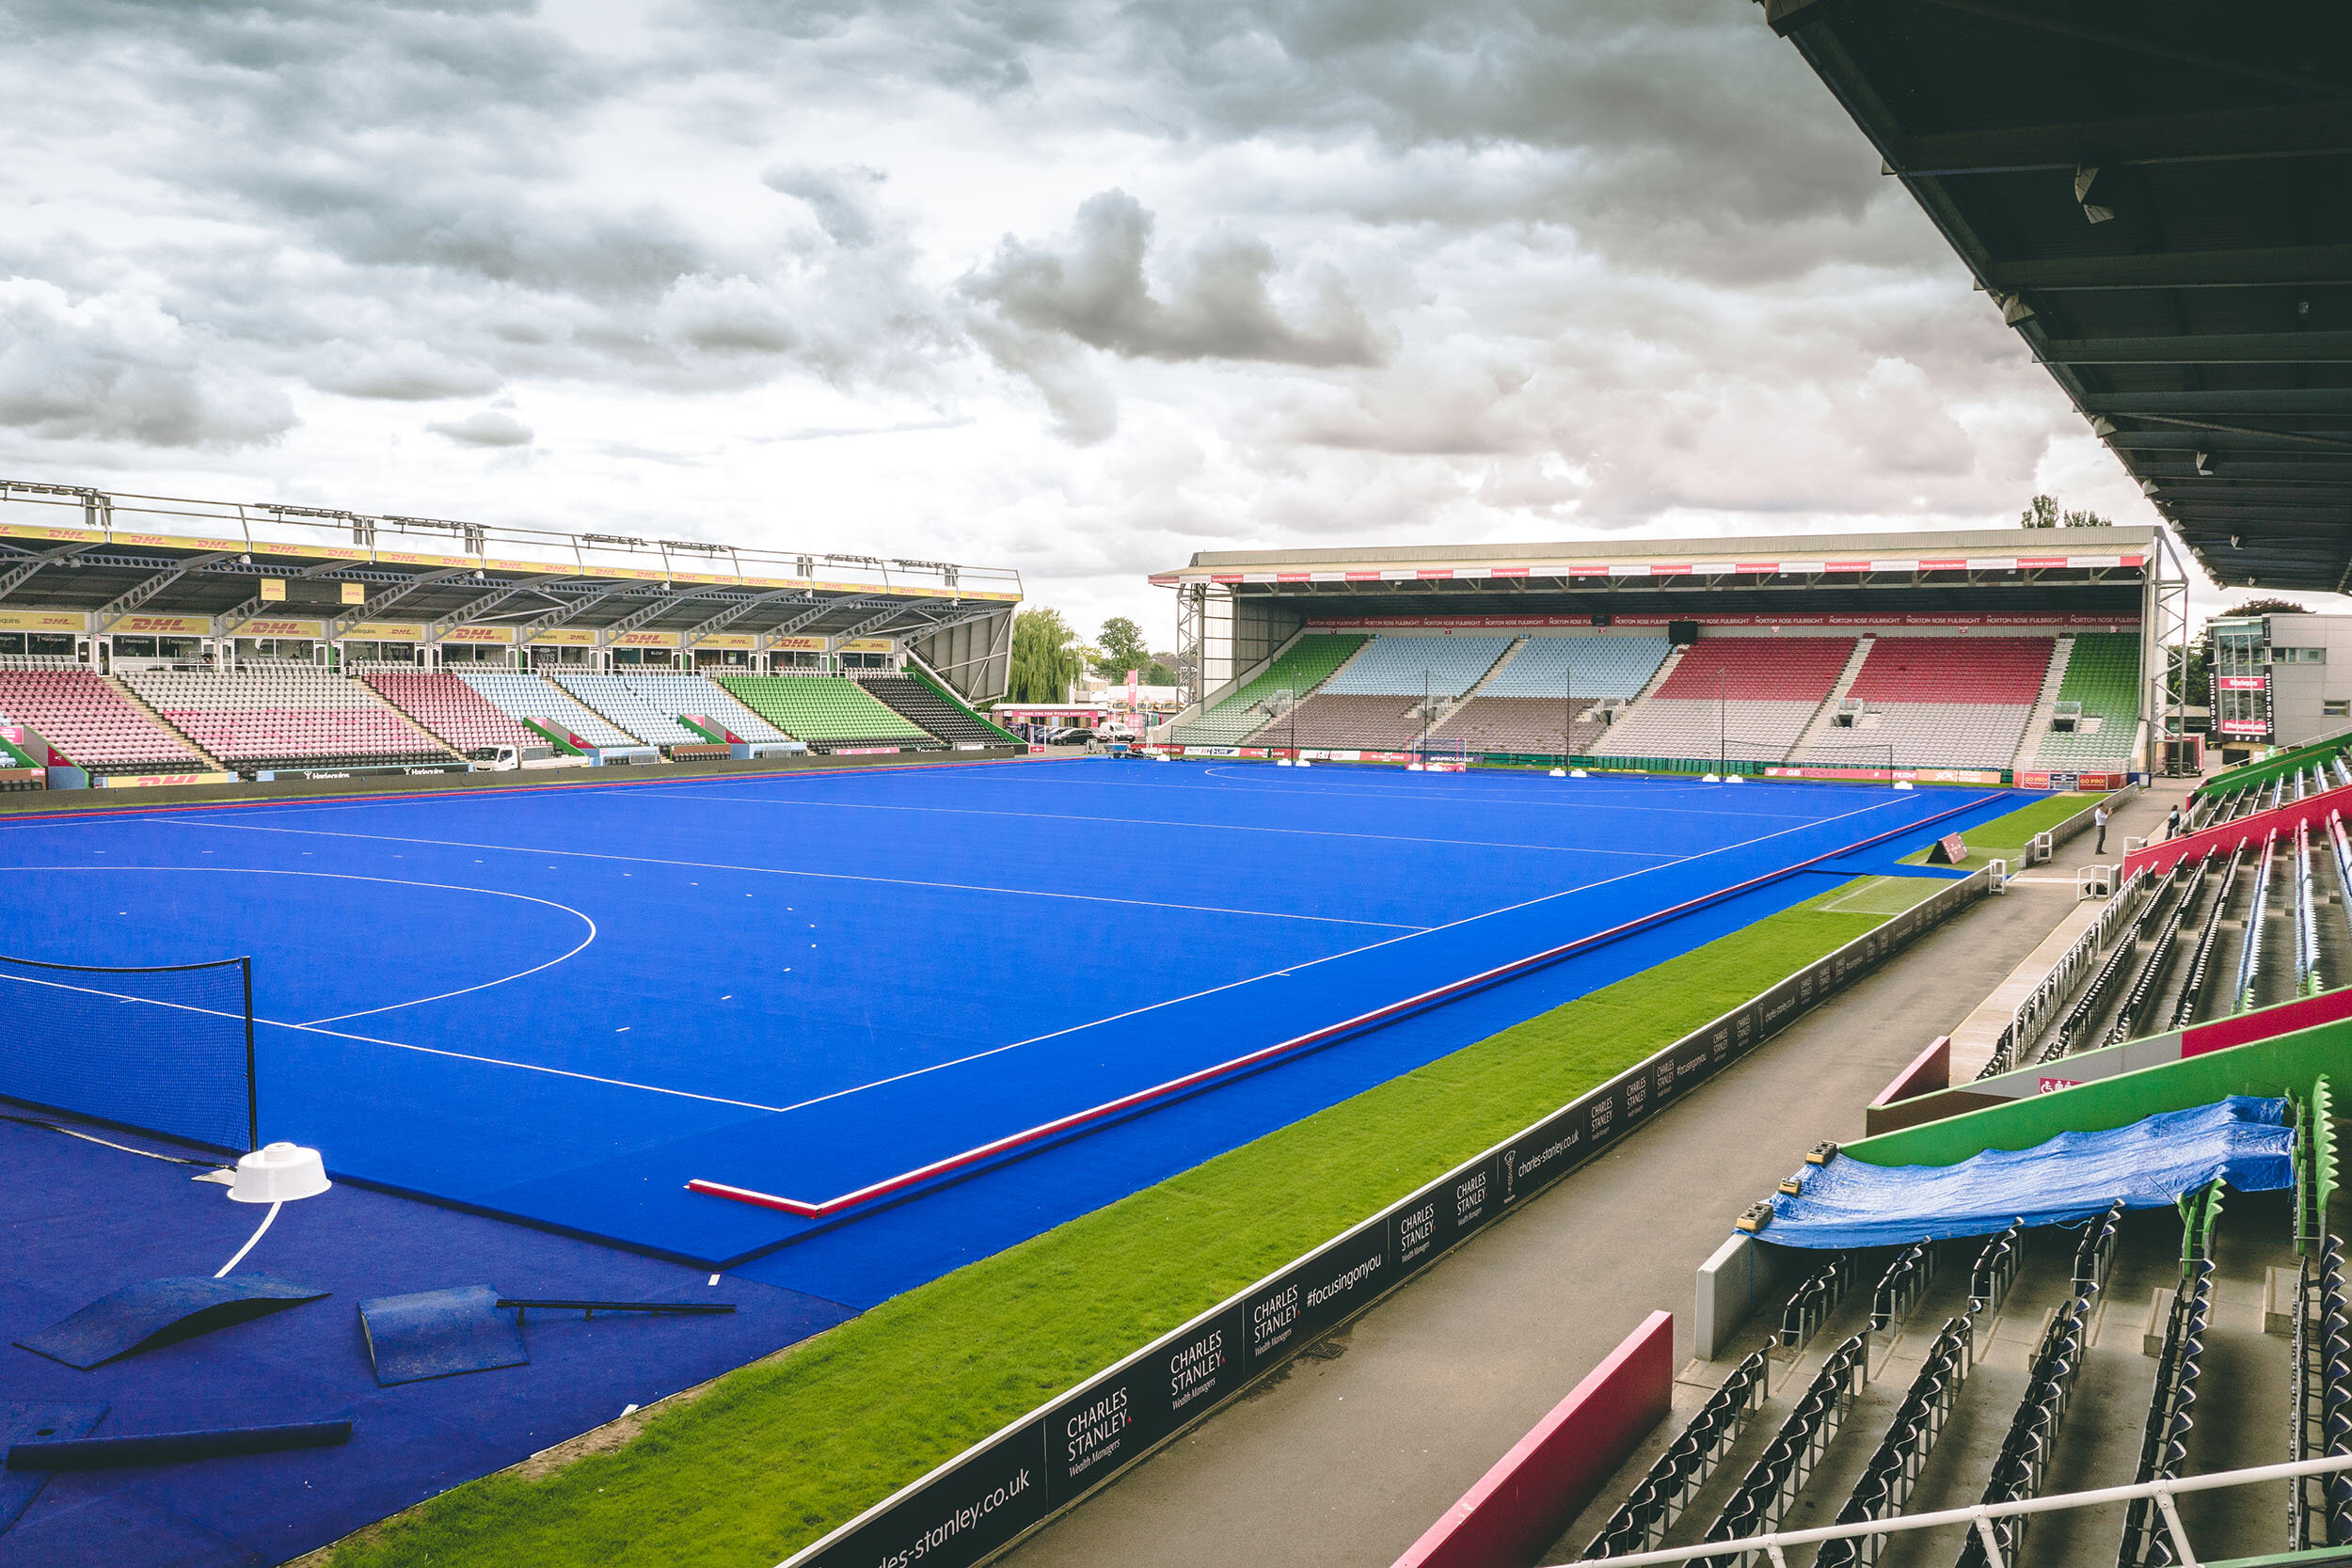 Temporary hockey pitch surface at The Stoop in Twickenham